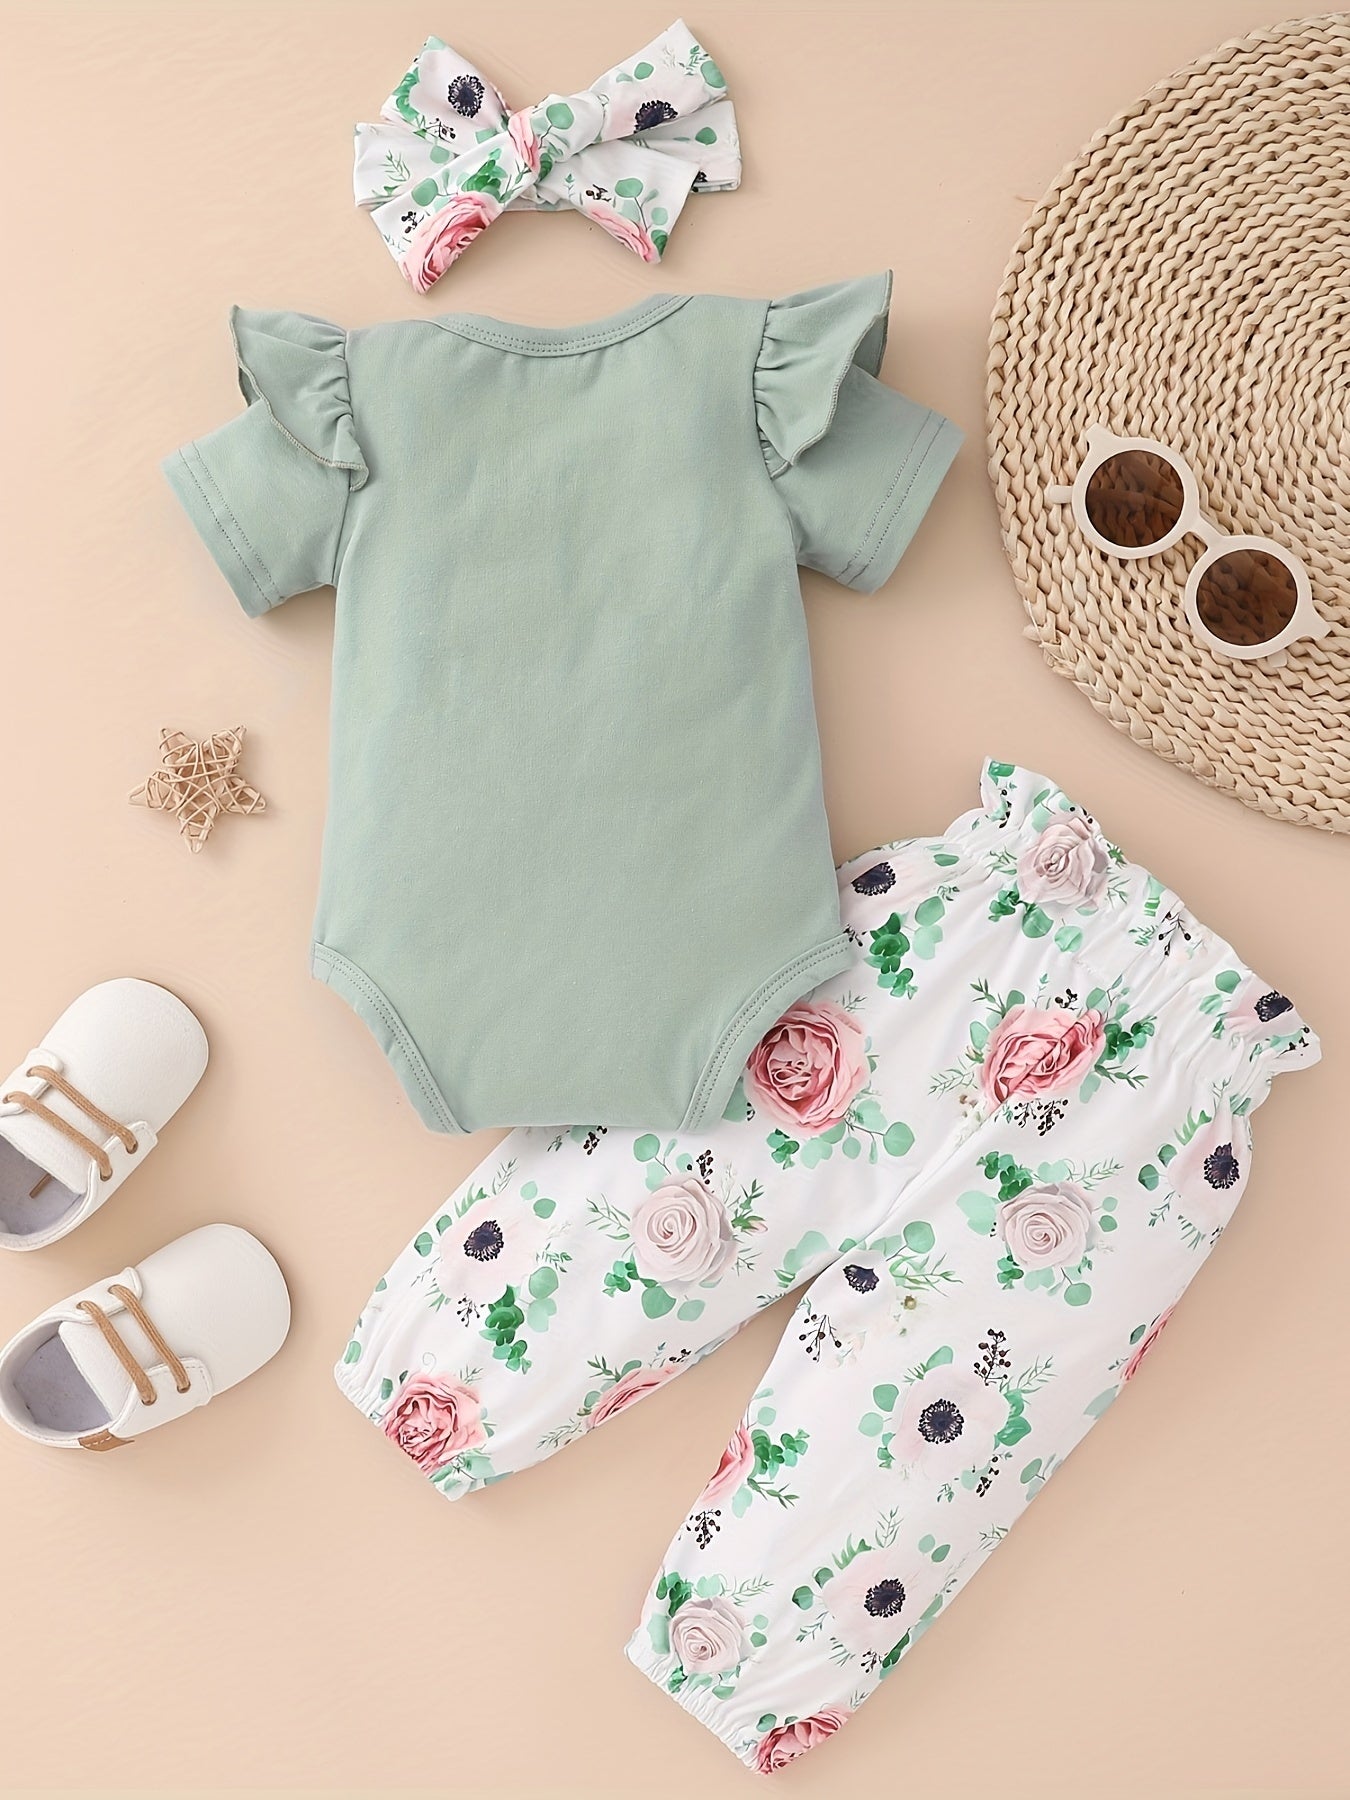 Baby Girls Cotton Short Sleeve Bodysuit Romper + Matching Floral Print Pants + Headband Baby Clothes Summer